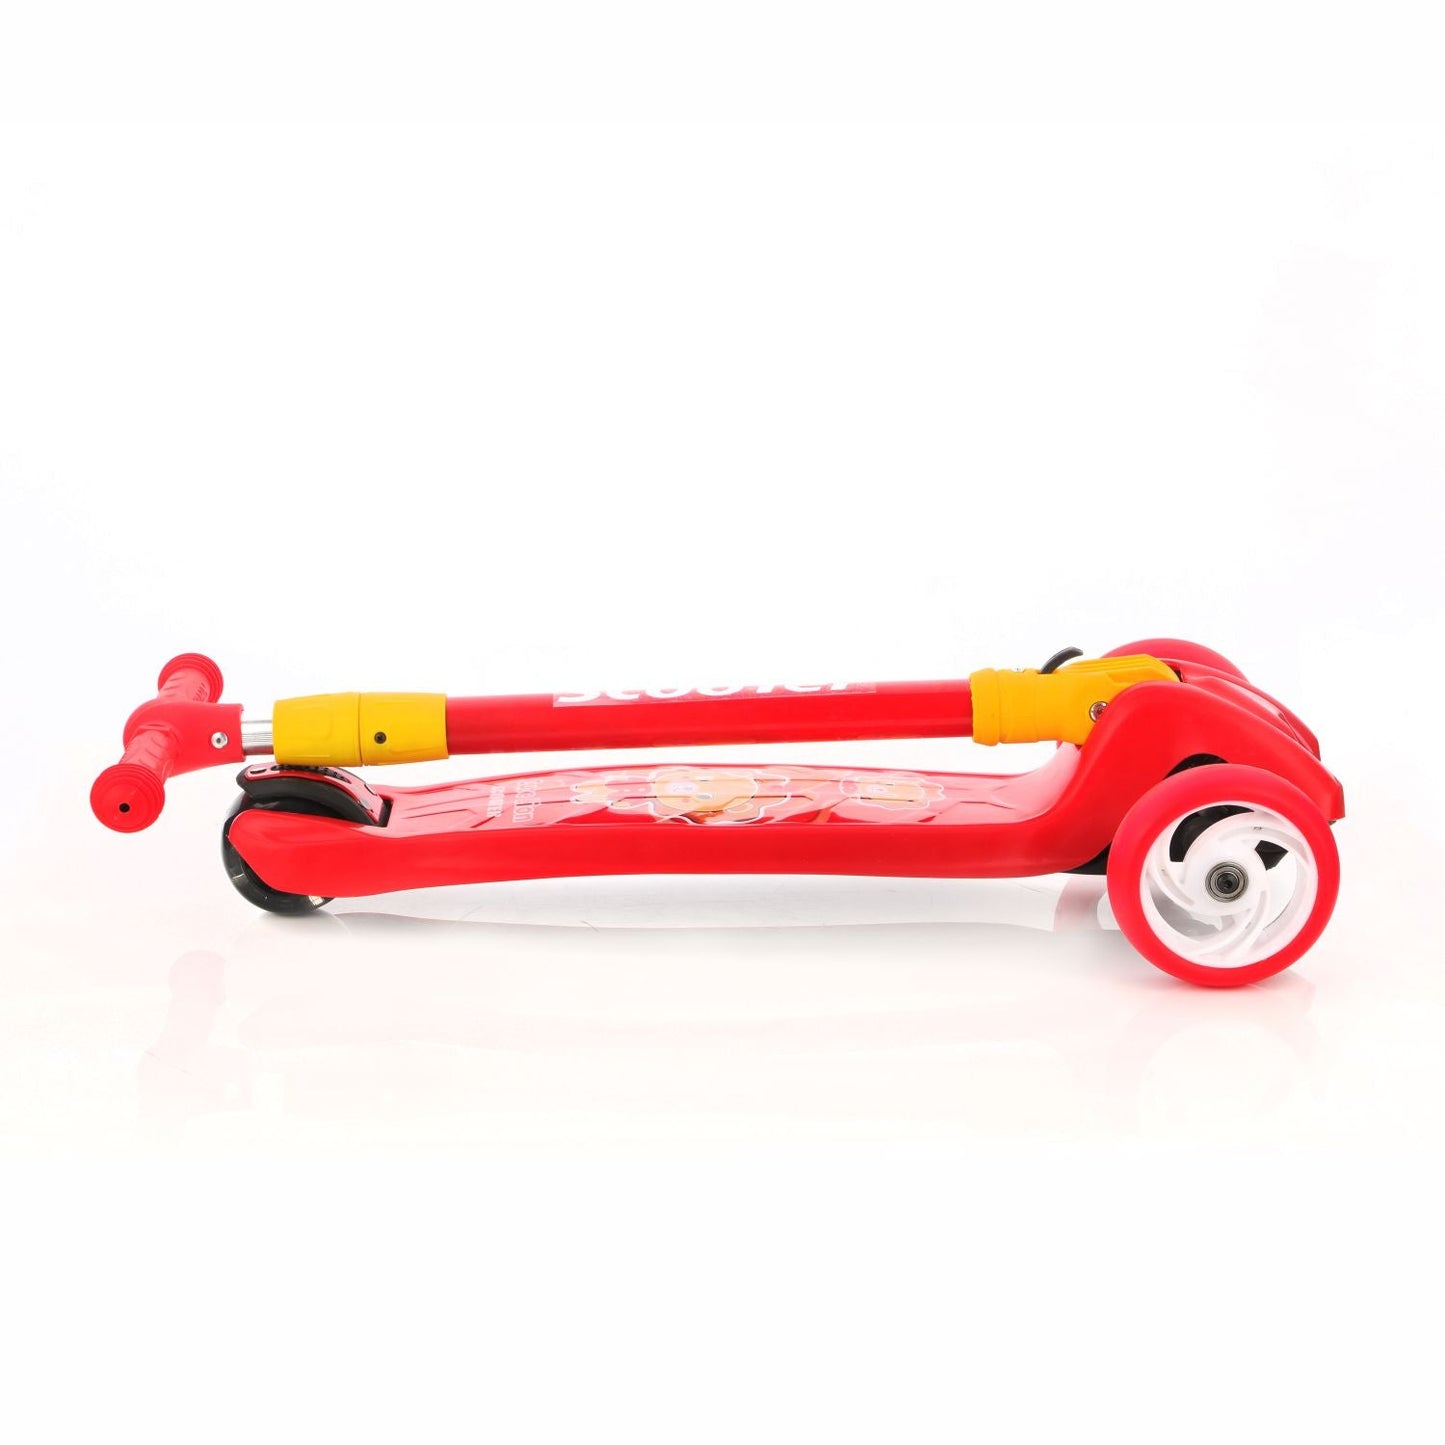 Chanak Premium Kick Scooter for kids Glider Toddler Scooter